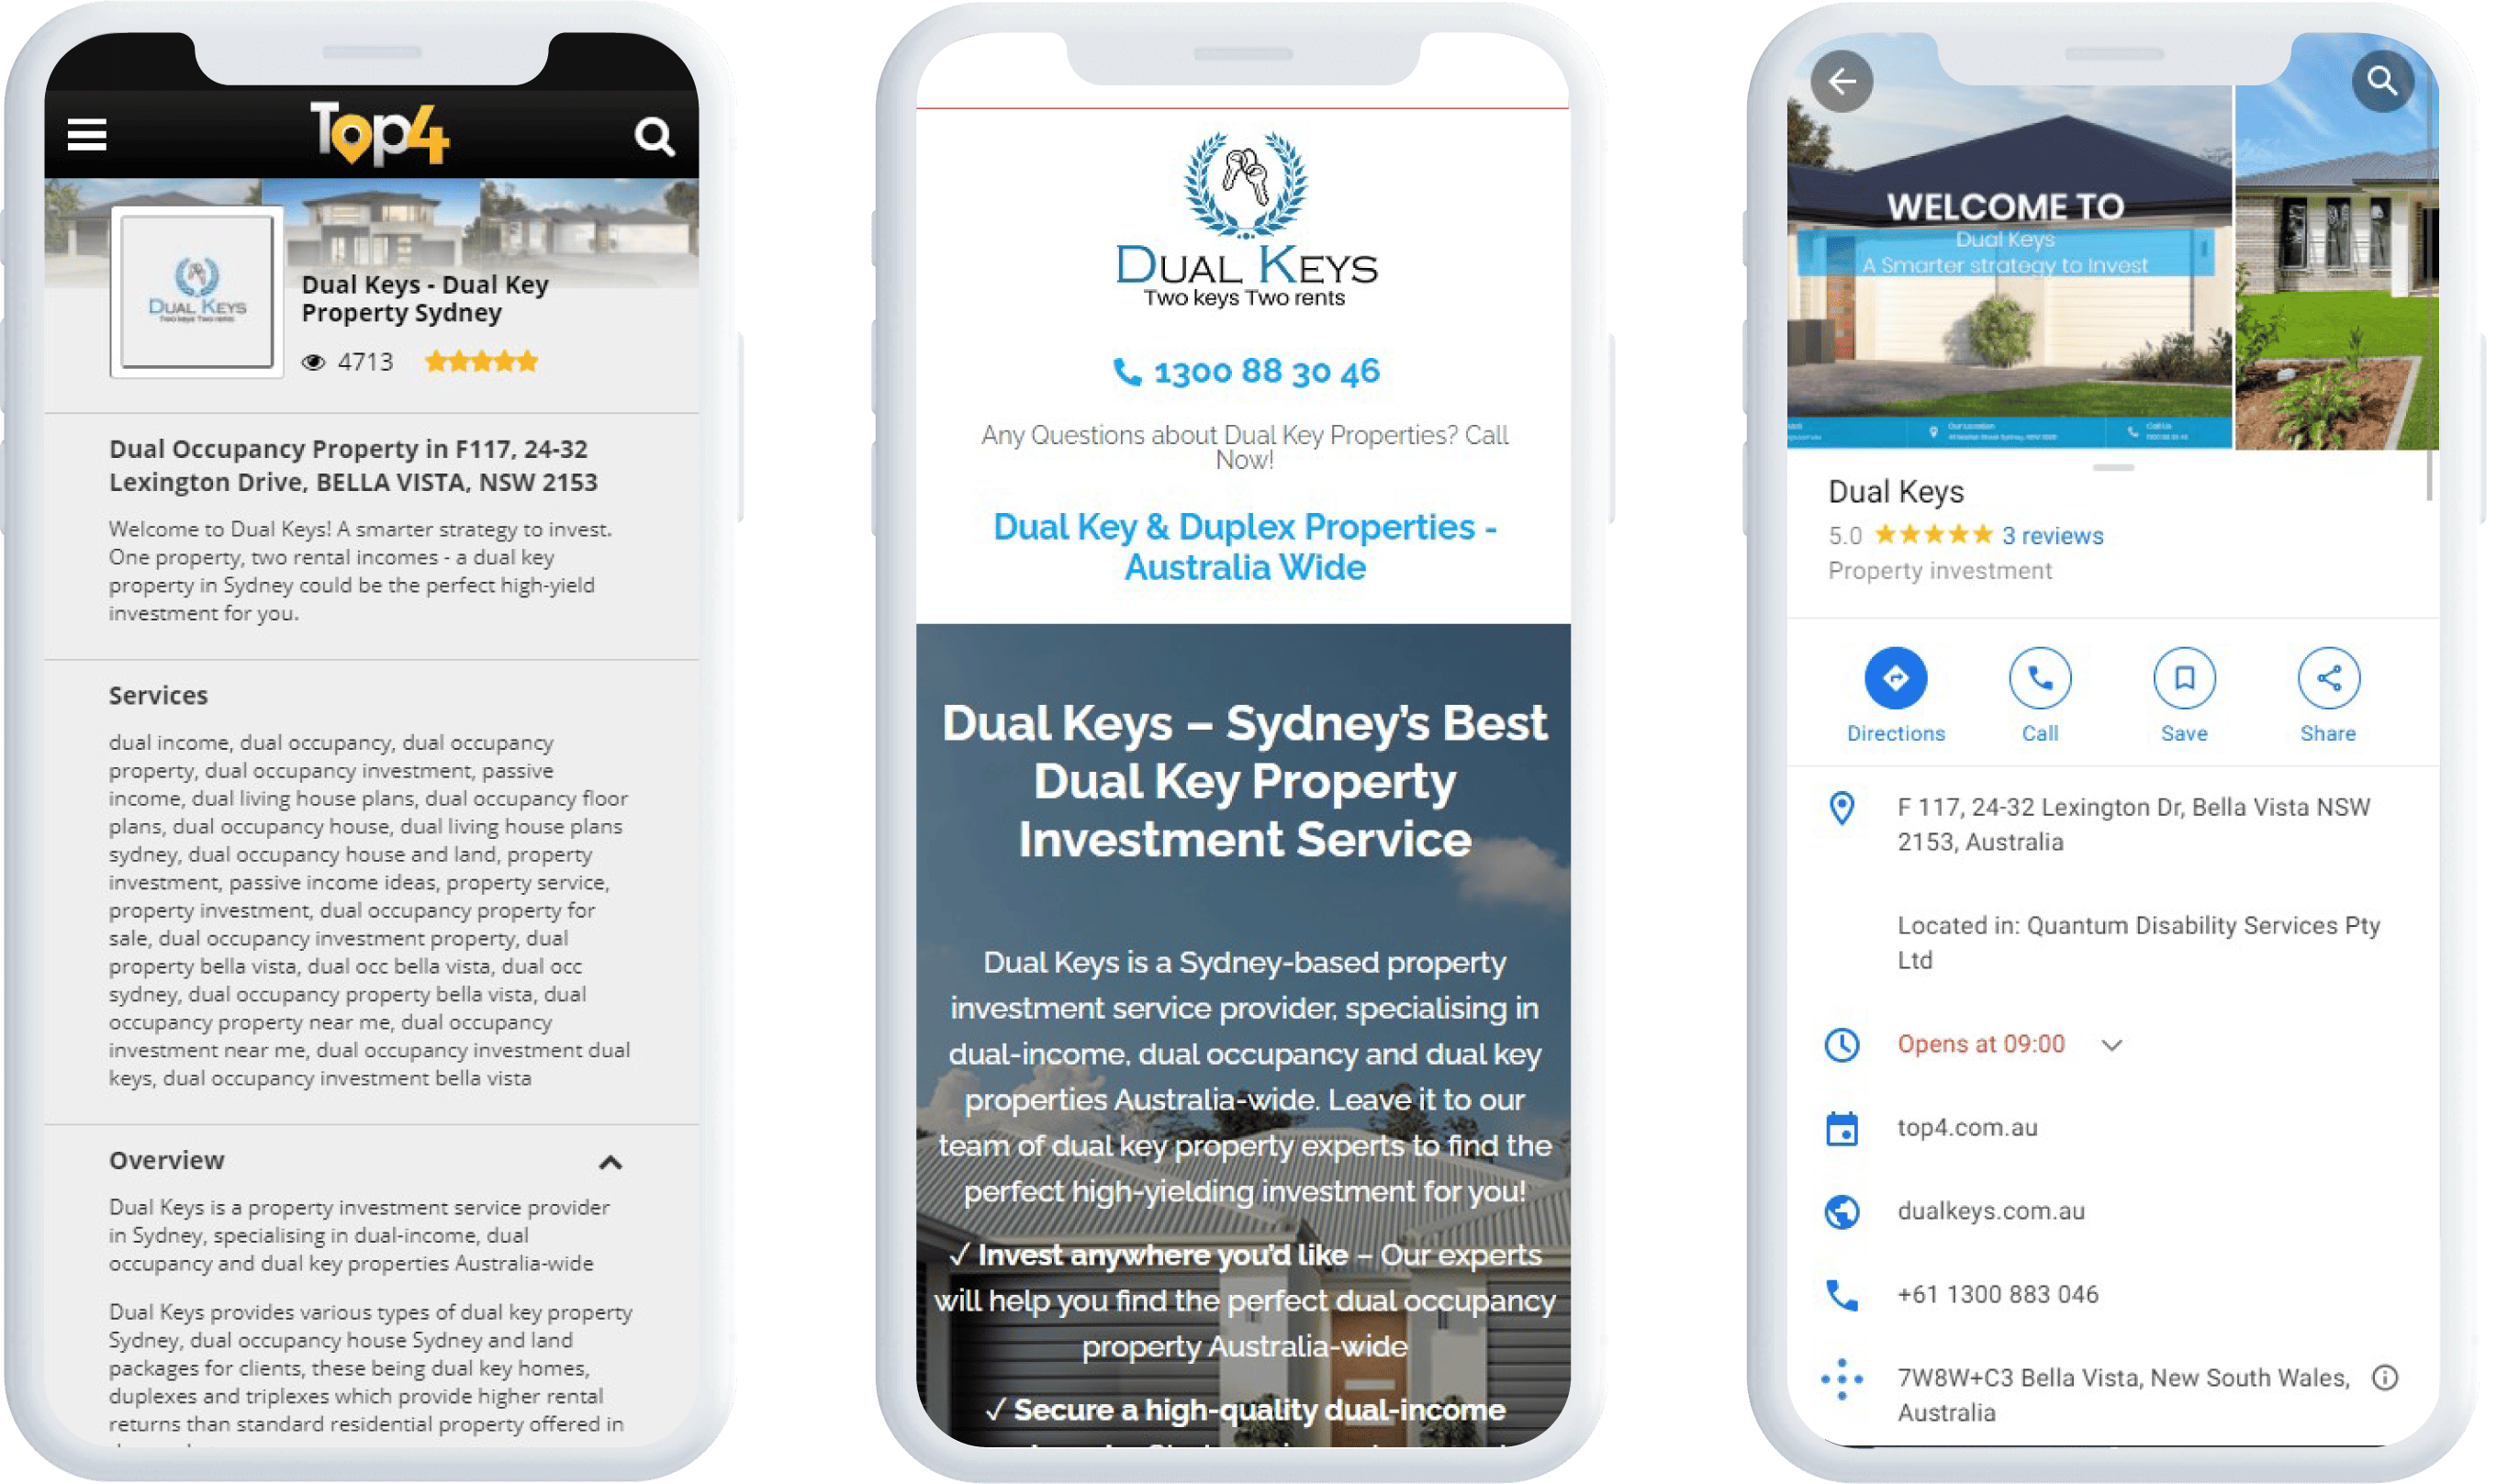 SEO Services for Dual Keys - Real Estate Agents